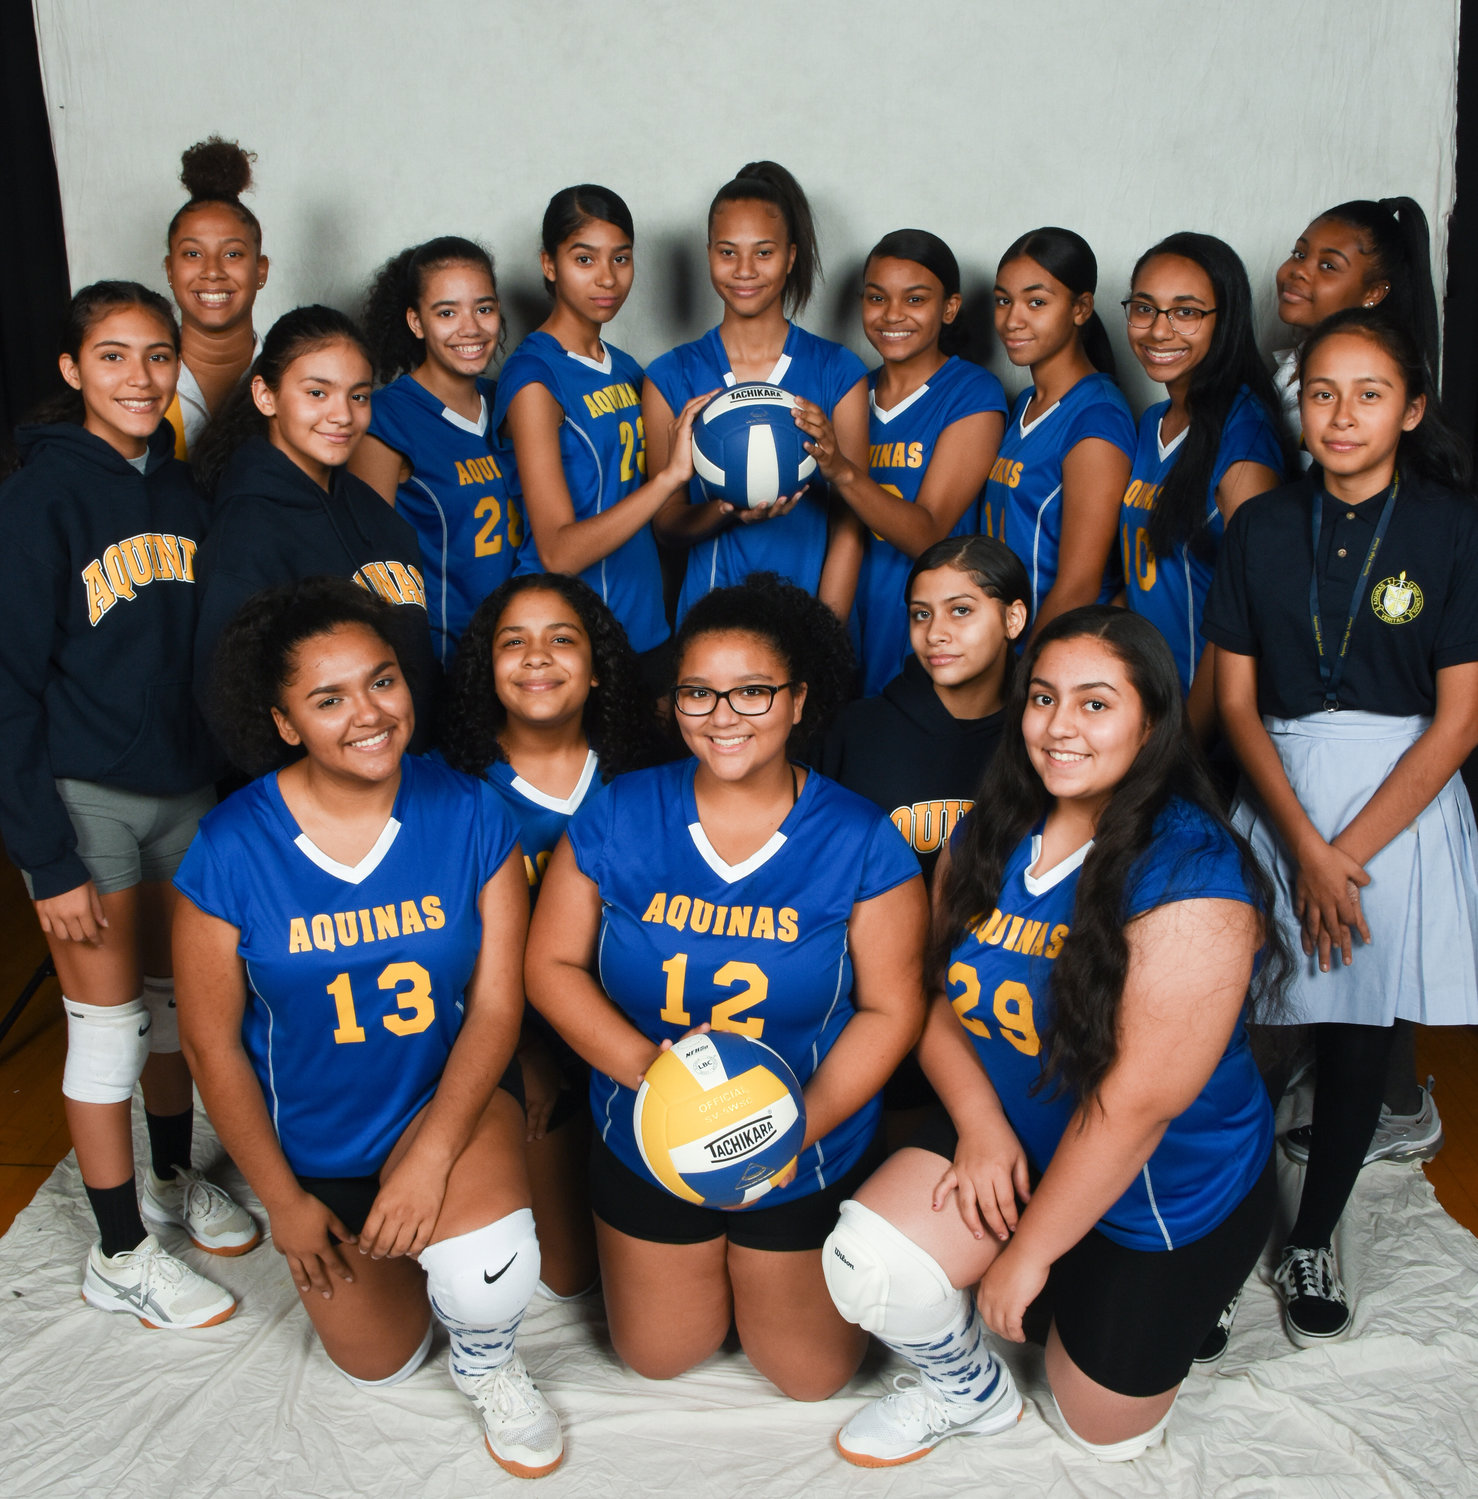 Volleyball was one of the varsity sports offered at Aquinas, which won the 2006 New York State Federation girls’ basketball championship.